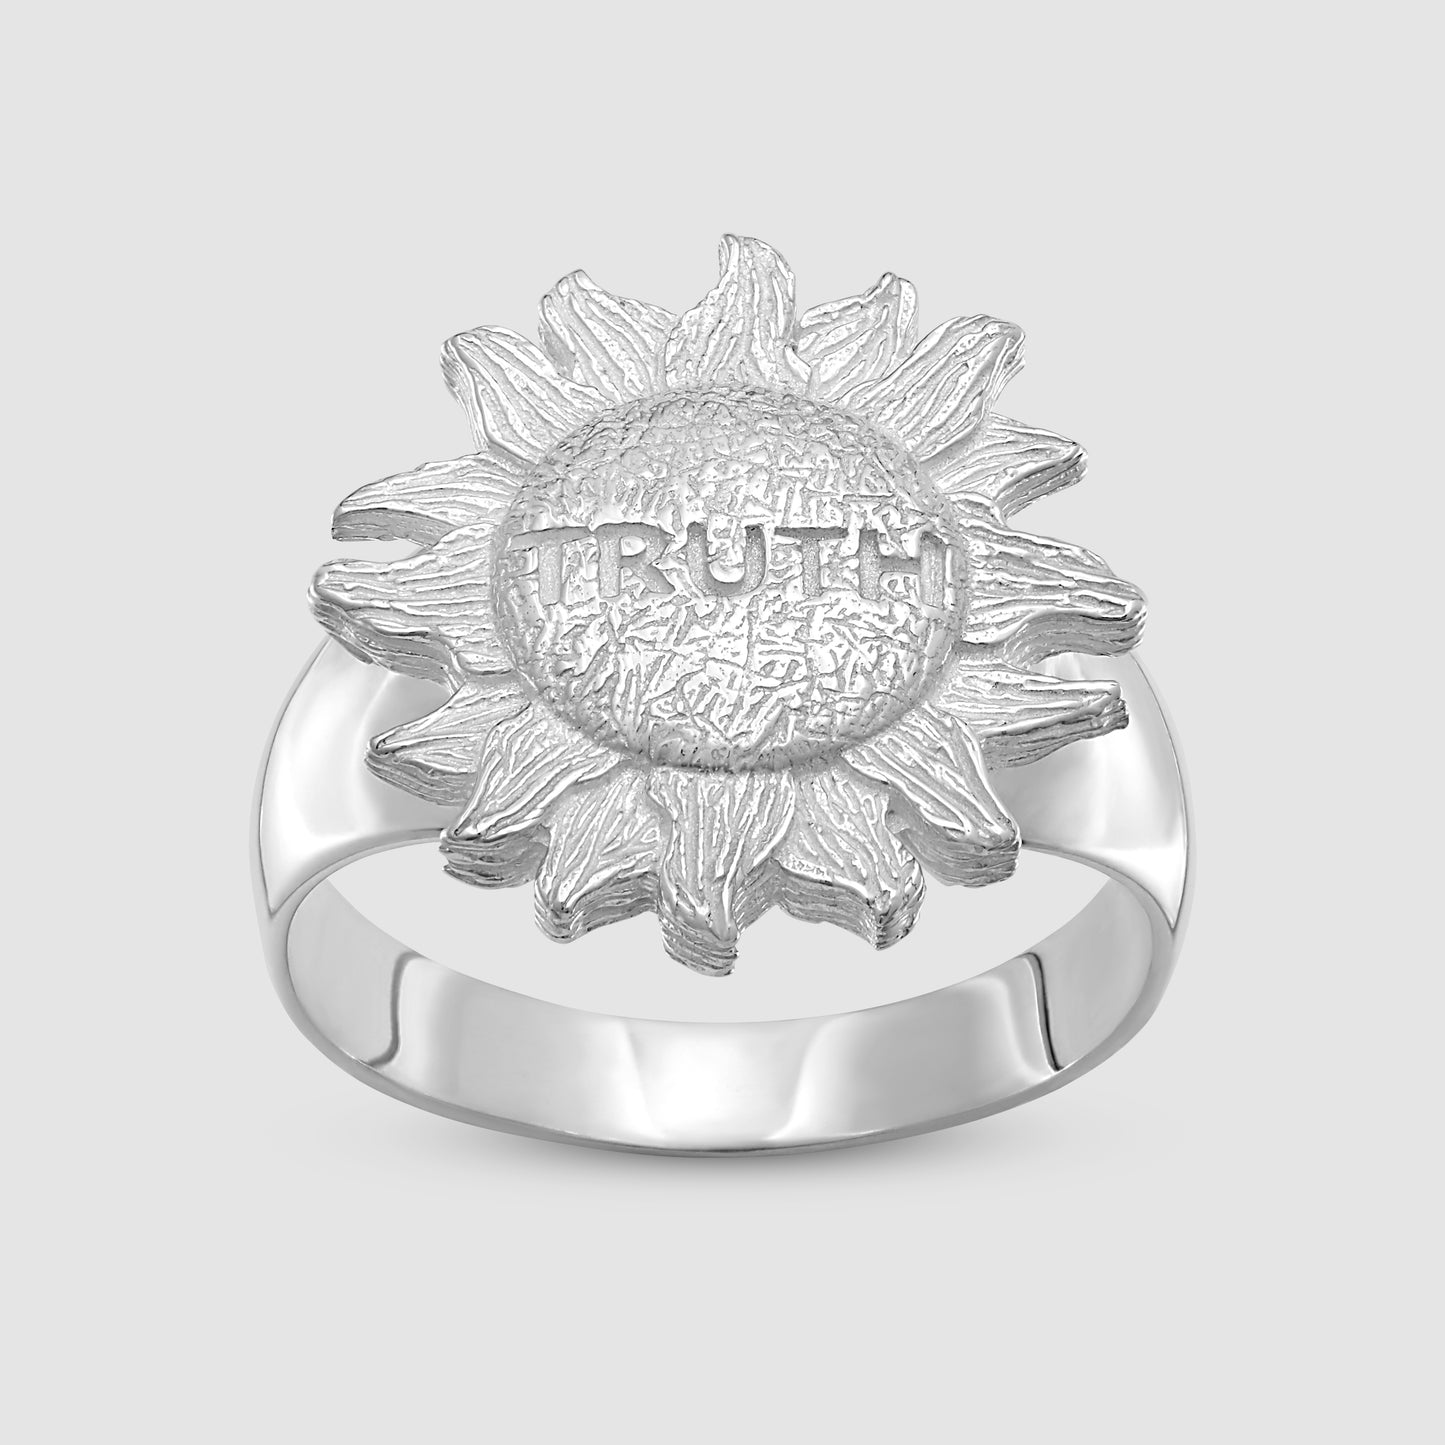 Truth is in the Sun Signet - Silver